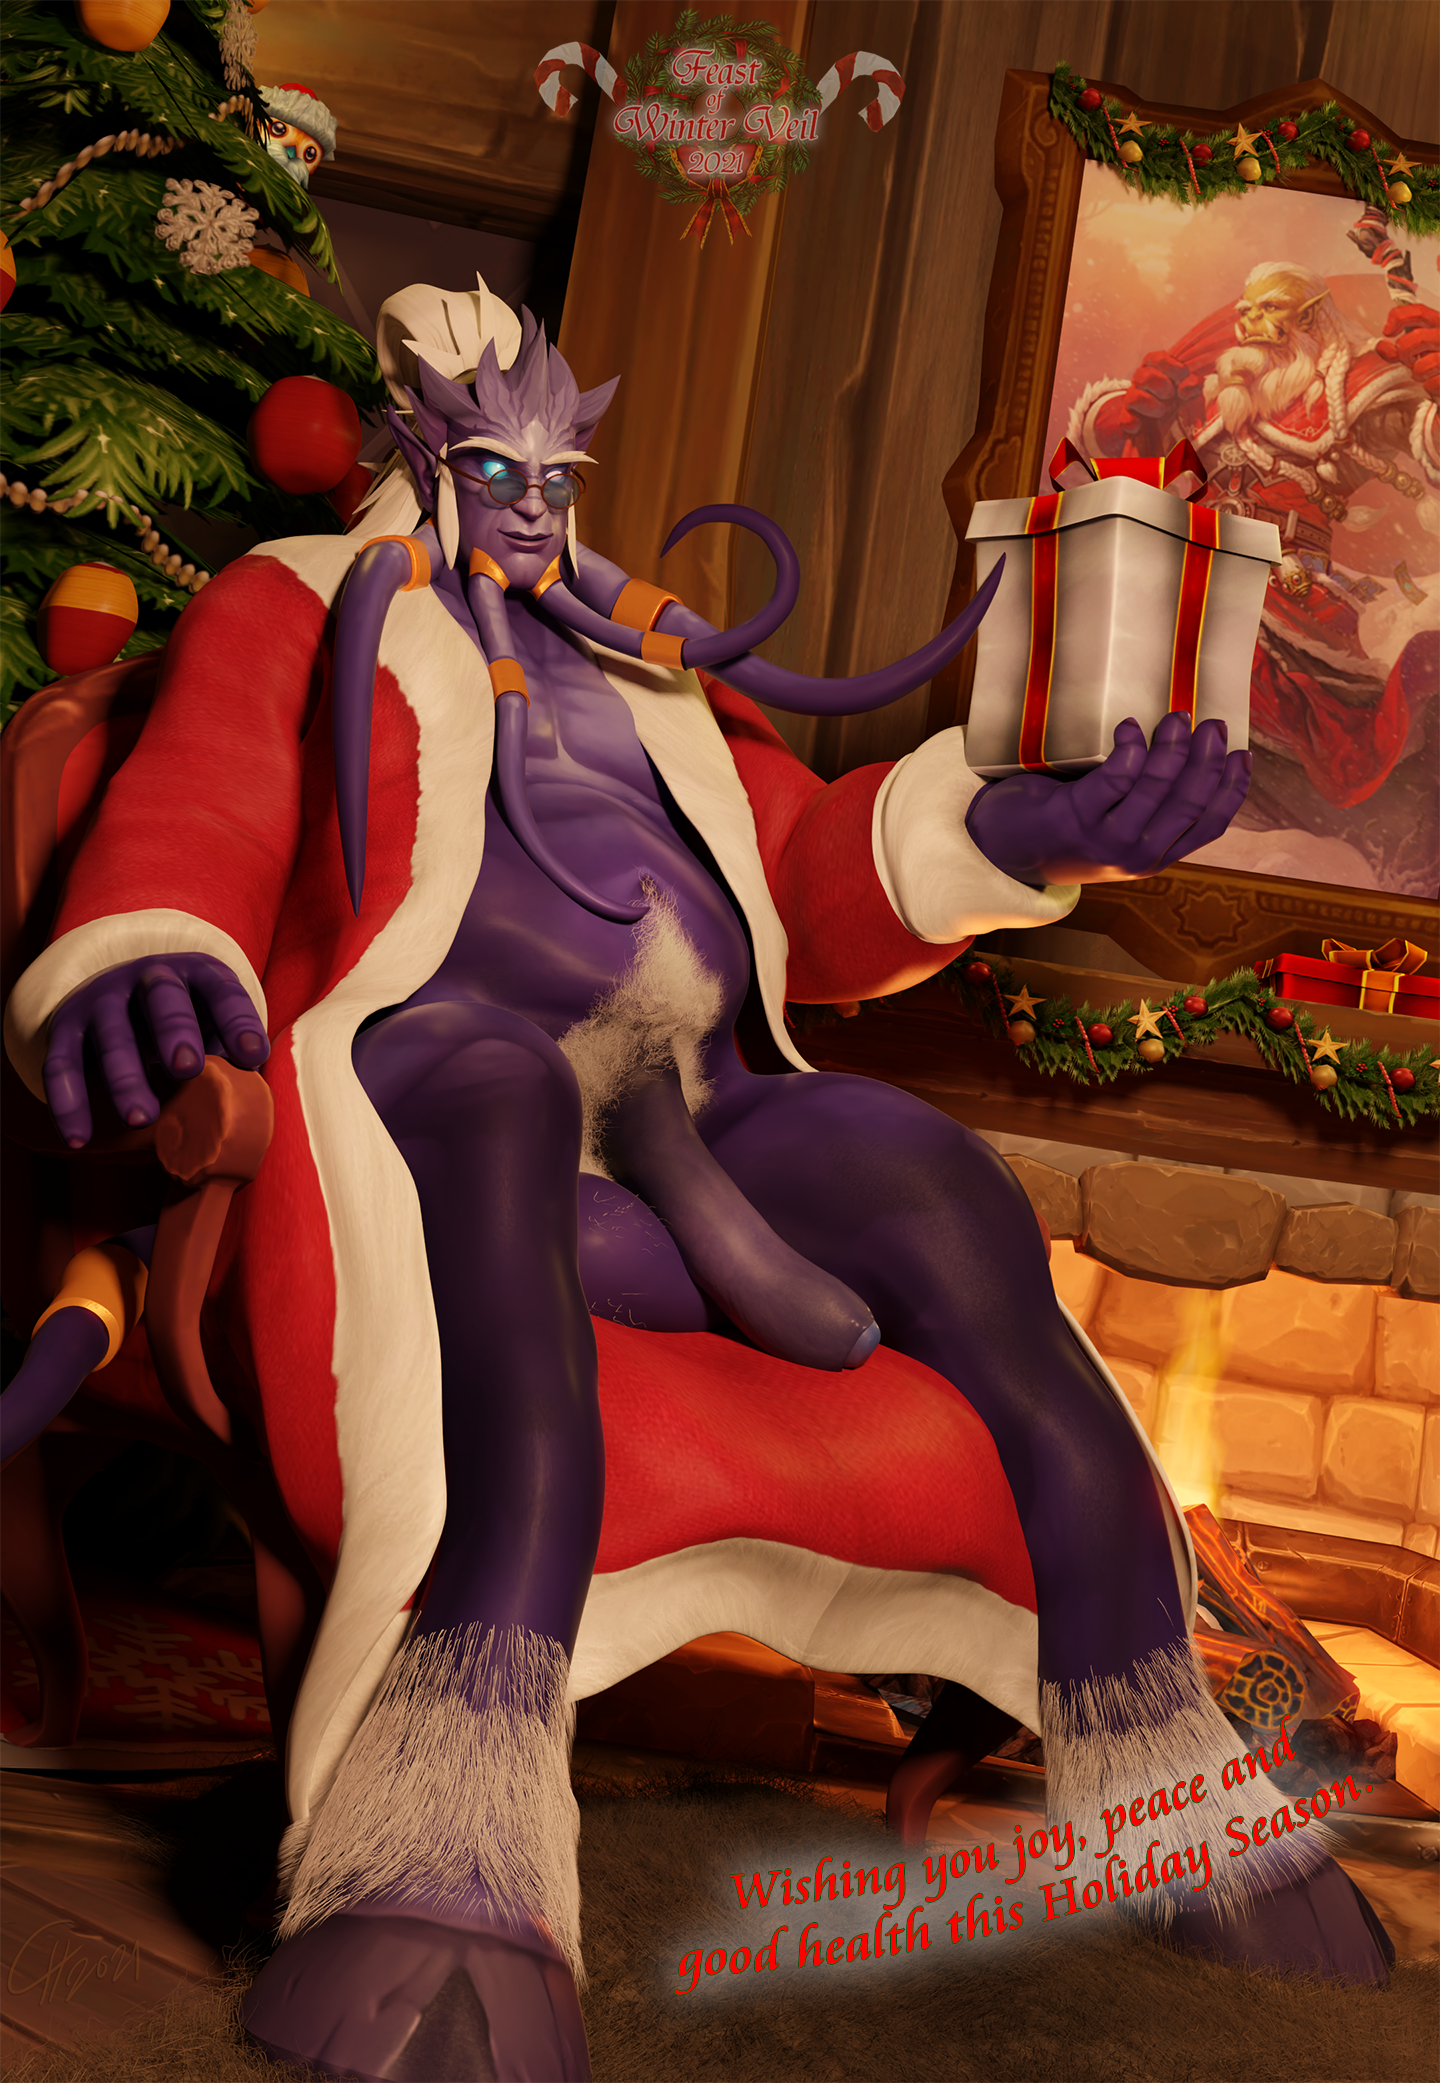 Winter Veil 2021: Gift Offering on the Eve [Draenei/Male Pinup]
The Eve of the Festivity is close and
so are the gifts! Some may get soft bundles,
some might get hard packages.
Which one will you recieve this Holiday?
[b][url=http://bakaras.com/murlocish/albums/userpics/10001/22/WinterVeil2021-05-18XL.png]==XL-Size Edit==?[/url][/b]
Keywords: OC;Draenei;Rule63;male-pinup